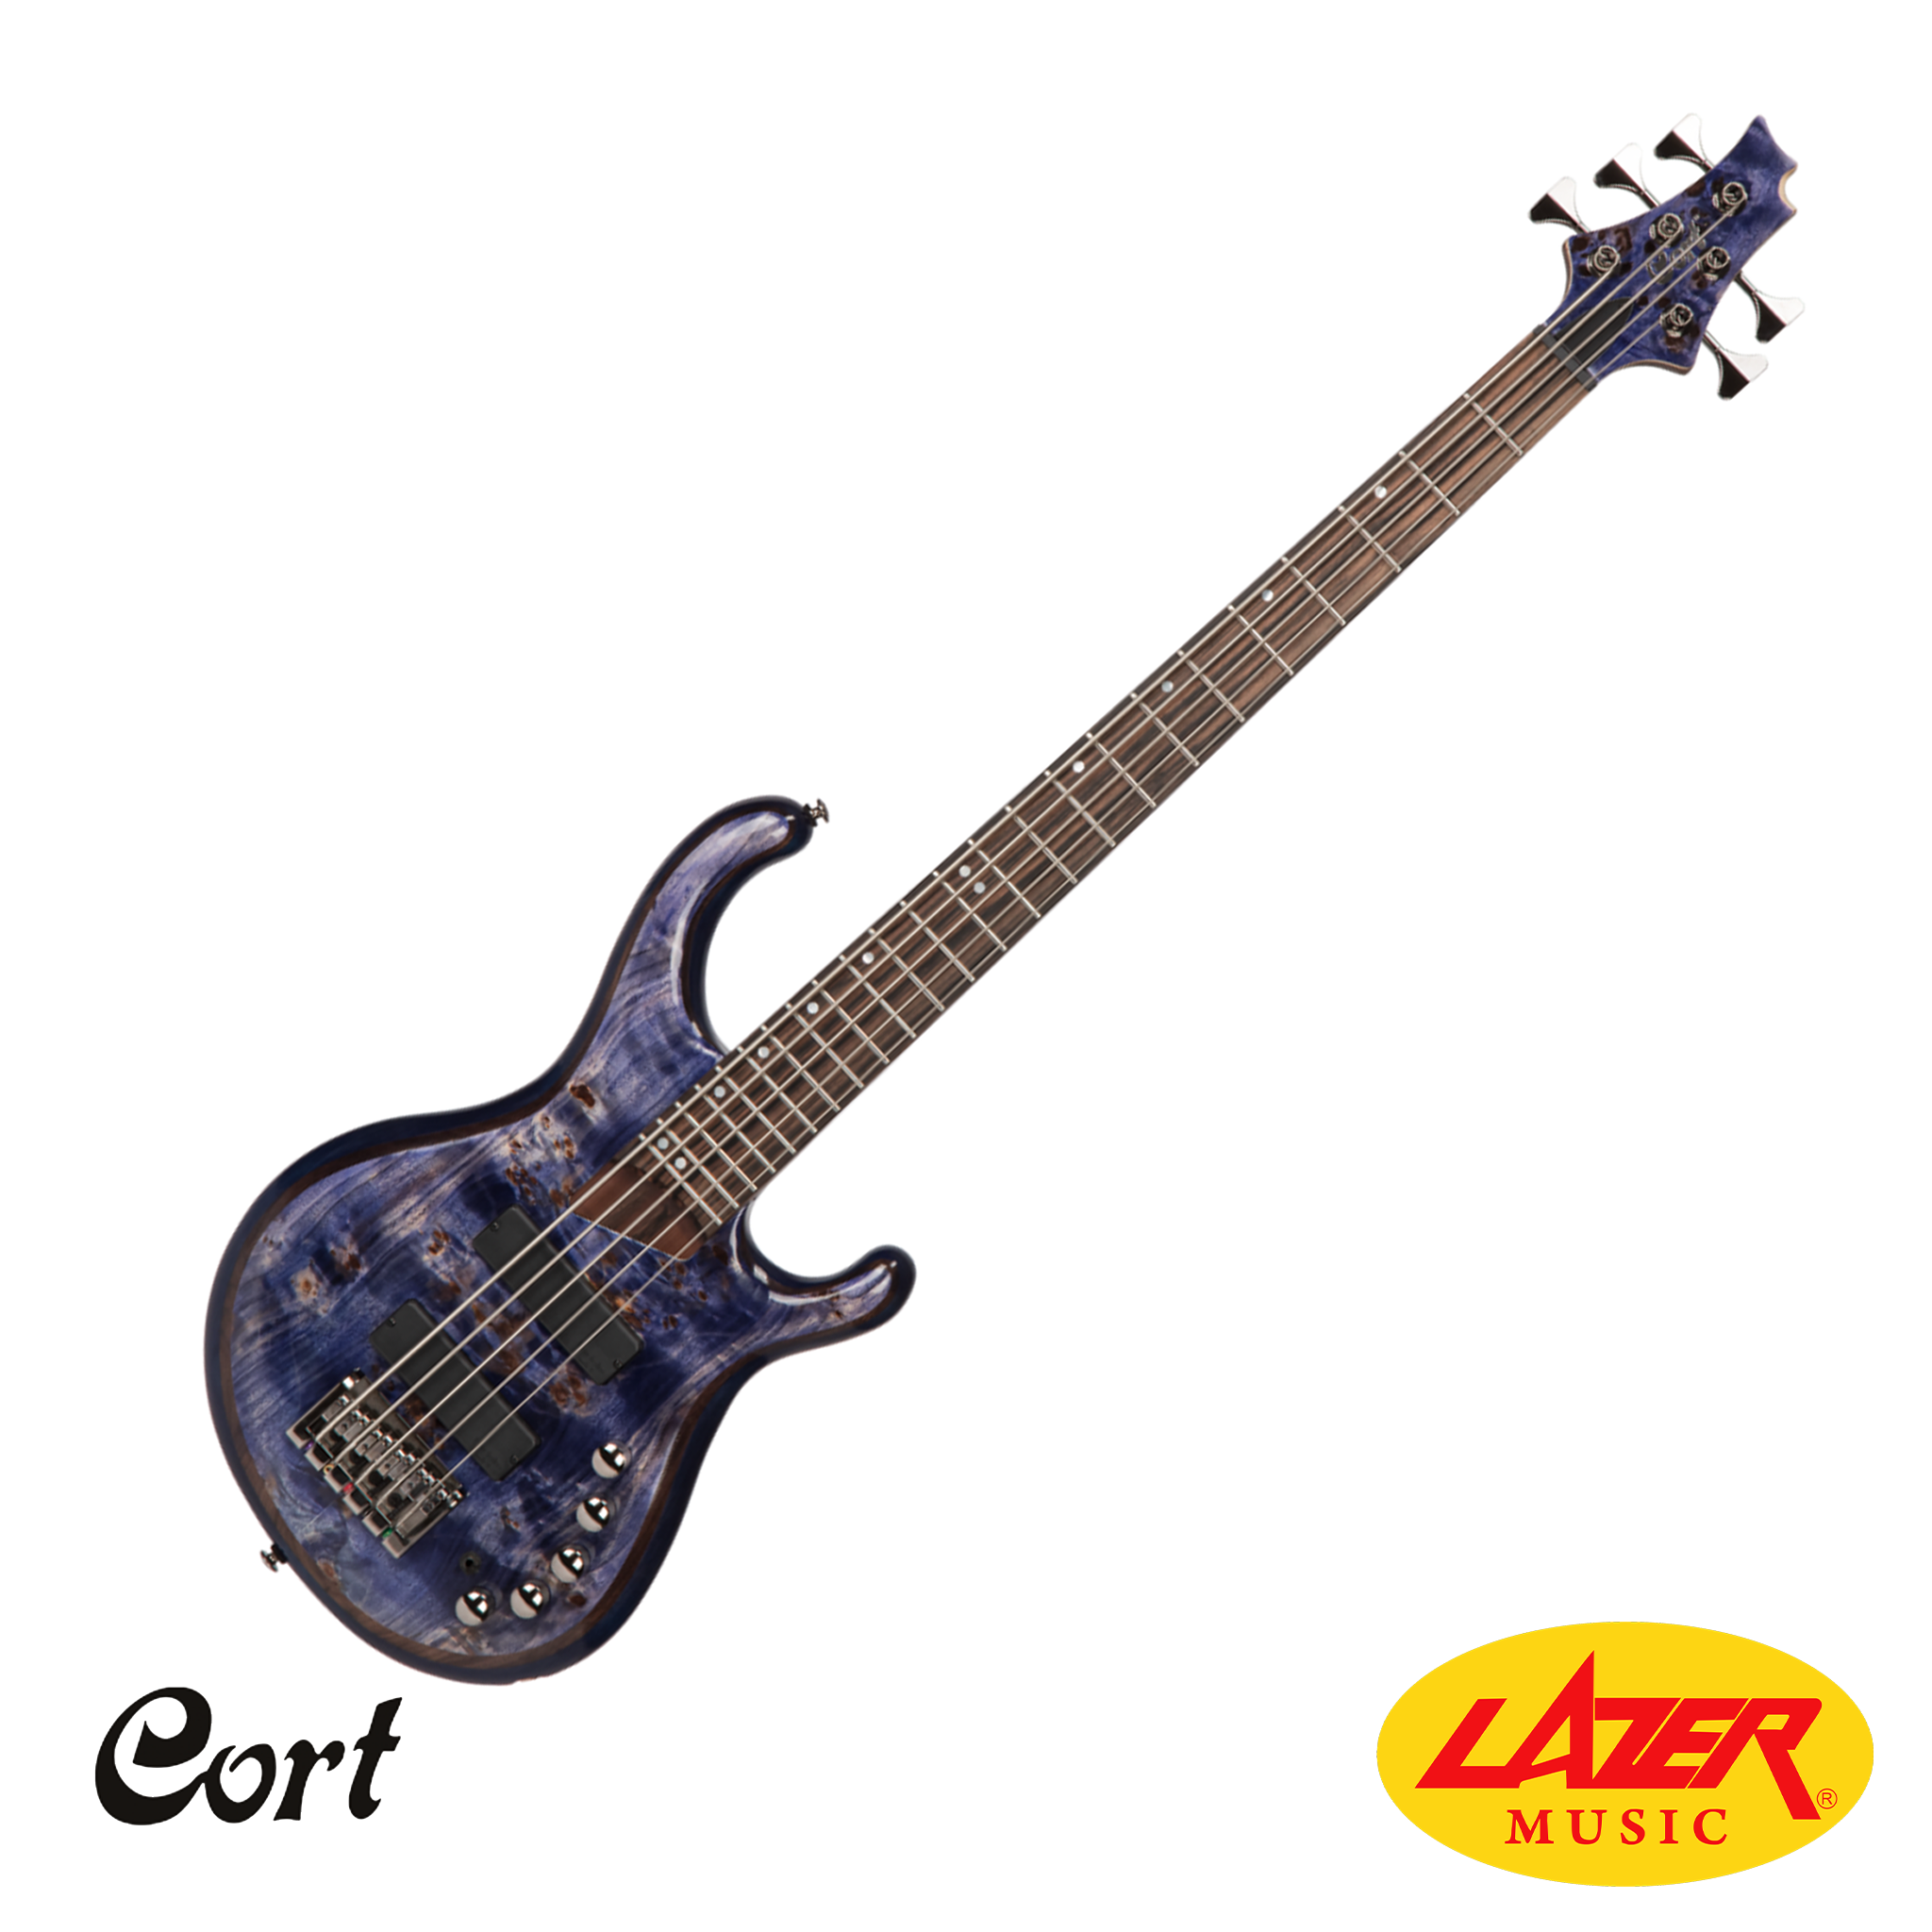 Cort PERSONA5 Alder Body 5 String Bass With Bartolini Preamp, Hipshot Tuners, and Bag